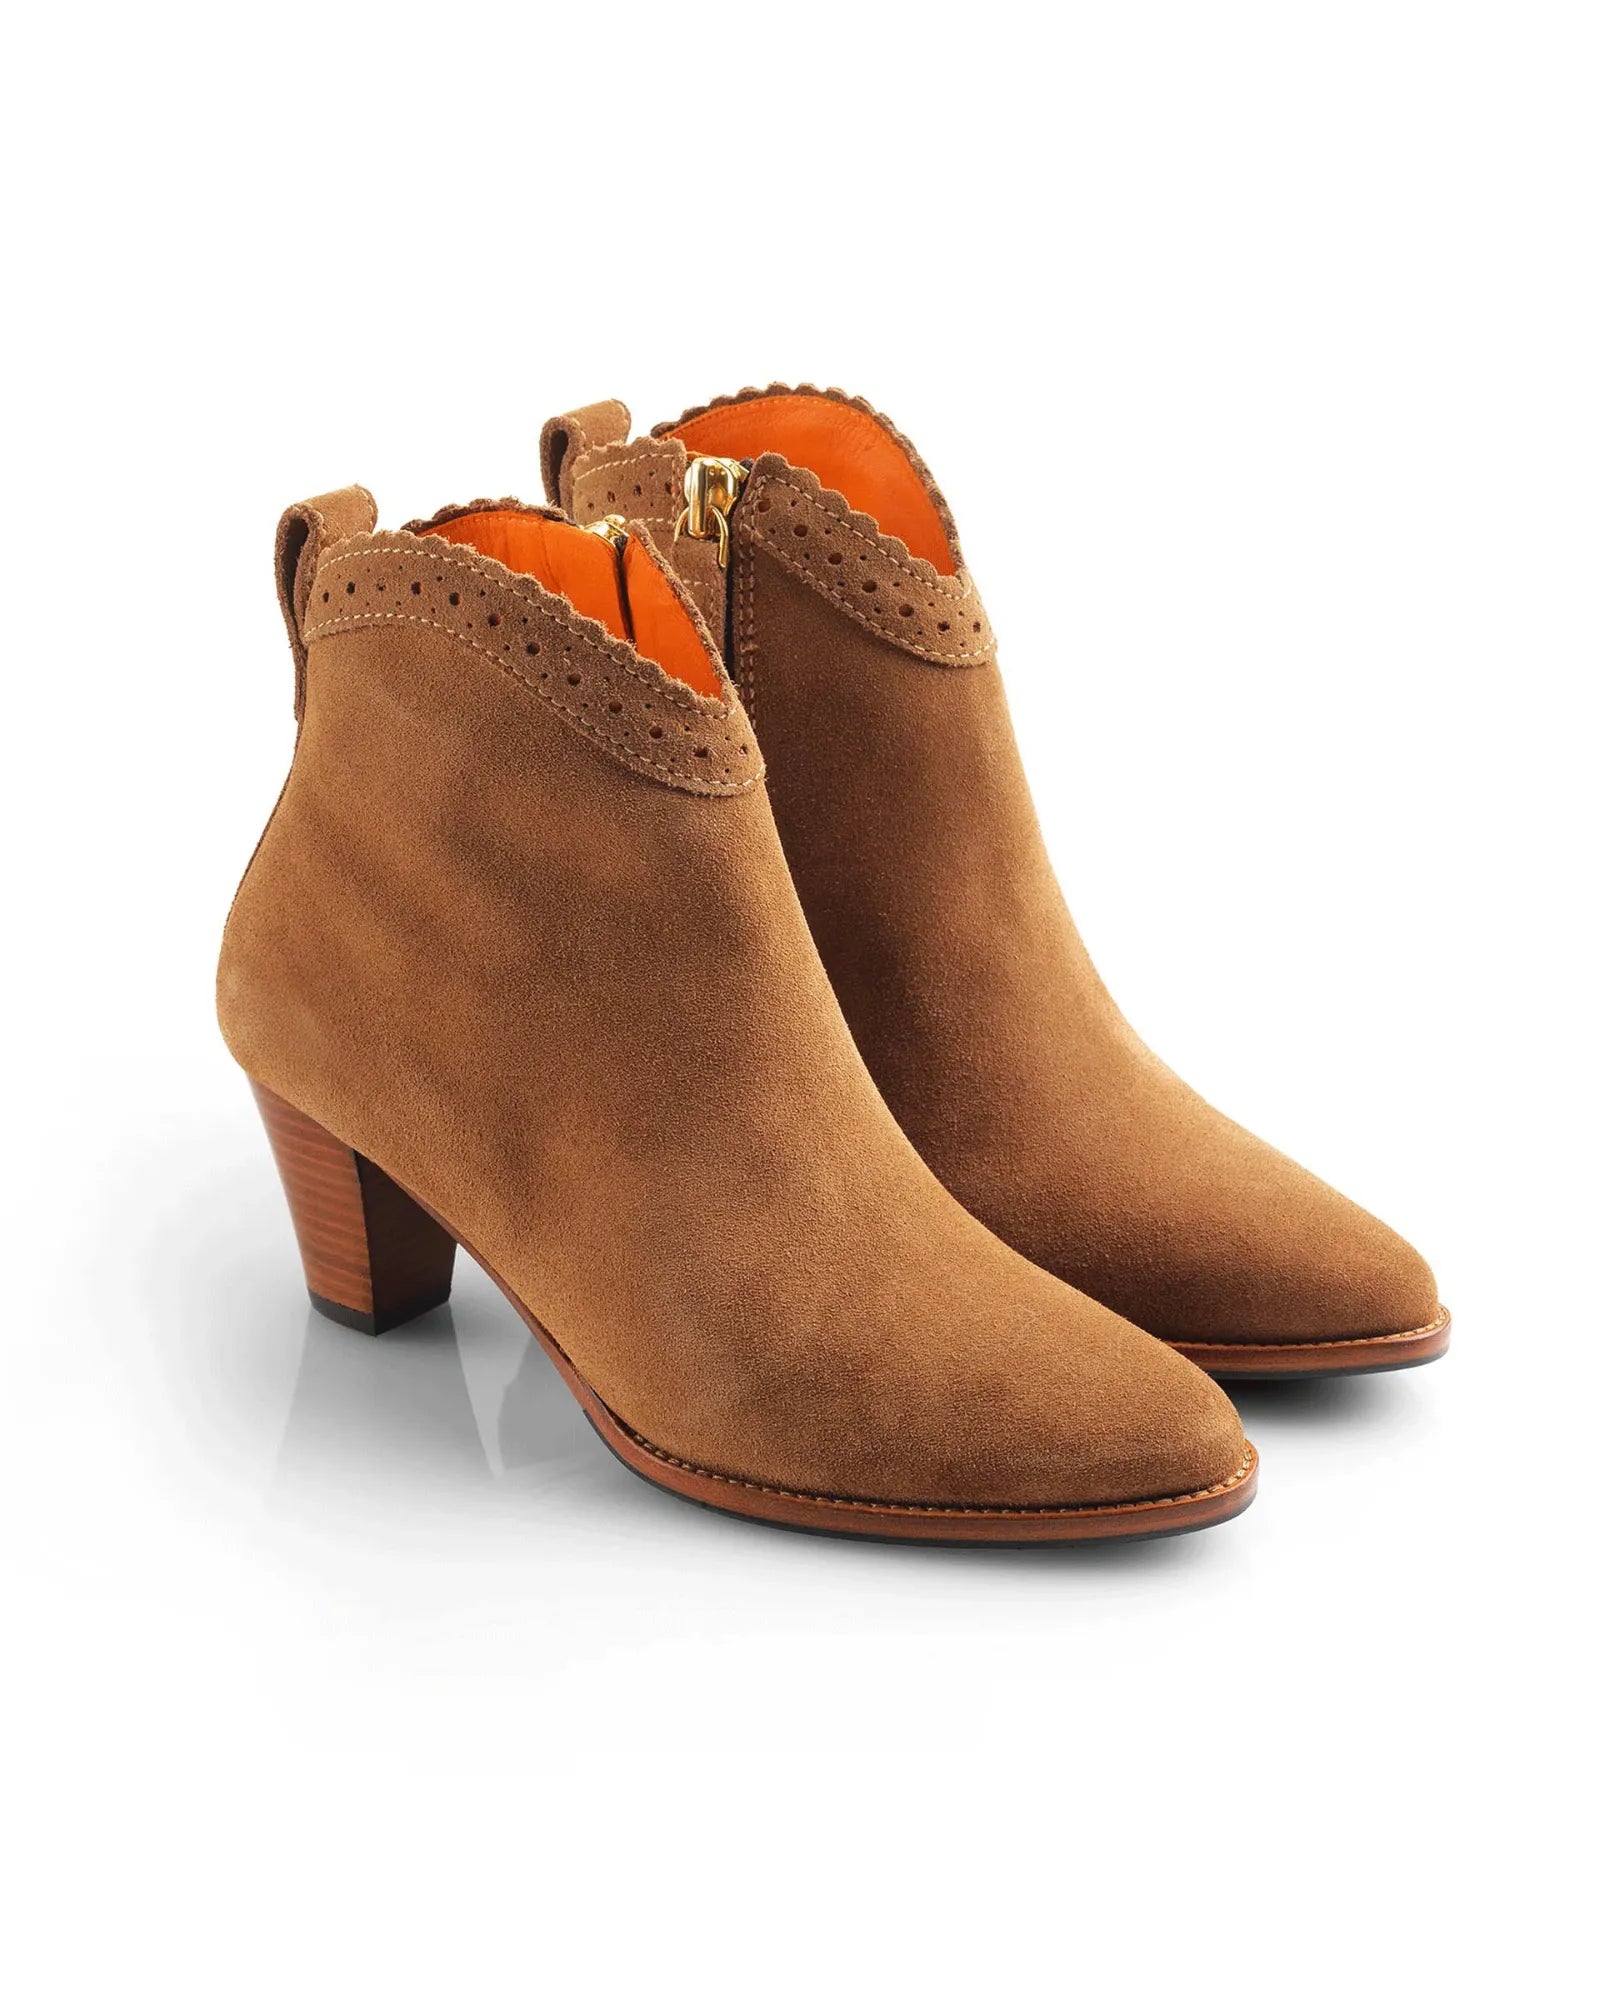 The Regina Ankle Boot in Tan Suede